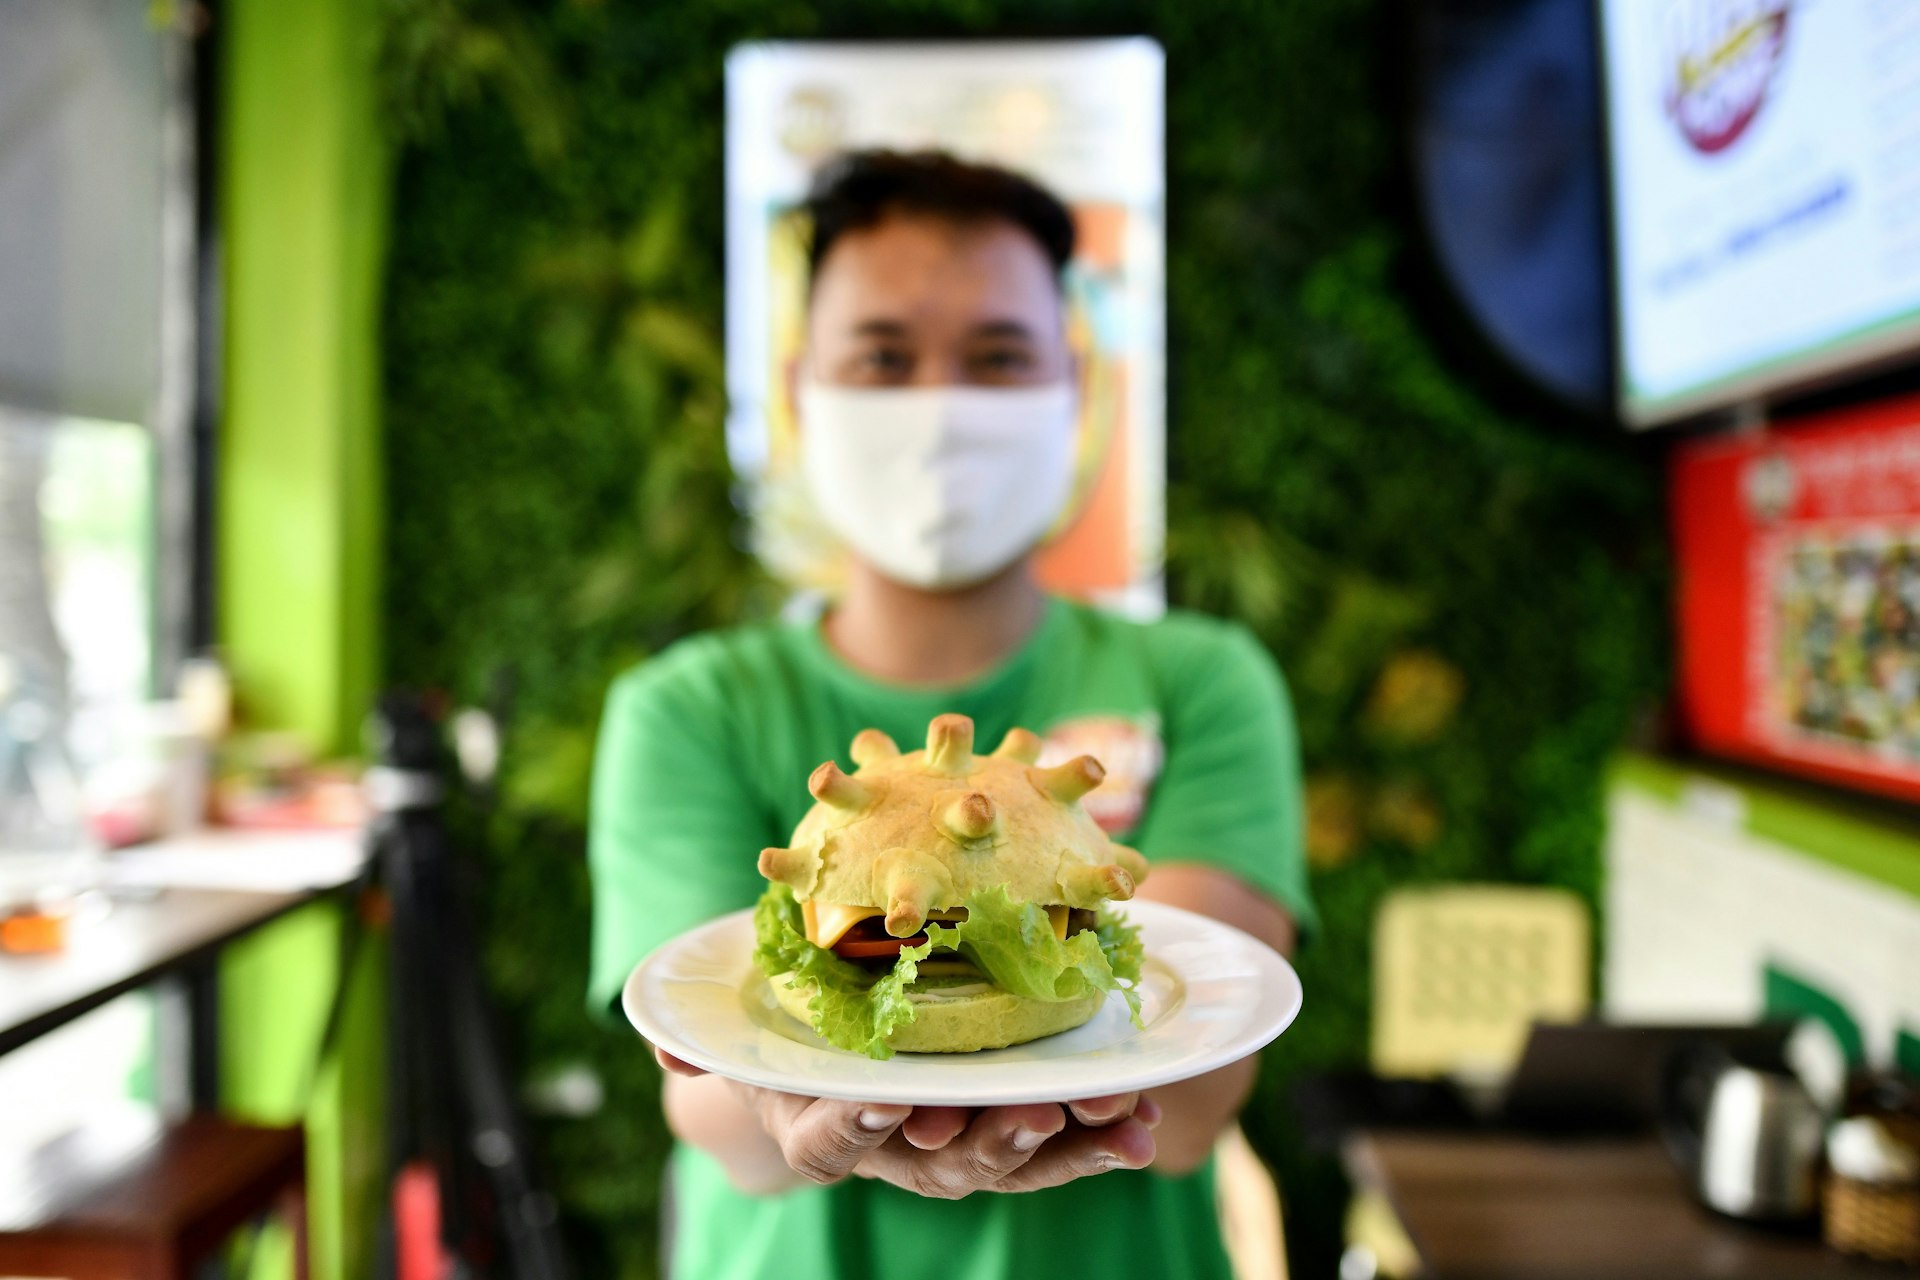 Pizza Home restaurant owner Hoang Tung poses with a coronavirus-themed burger in Hanoi on March 26, 2020, amid restrictions being put in place to contain the spread of the COVID-19 coronavirus. 